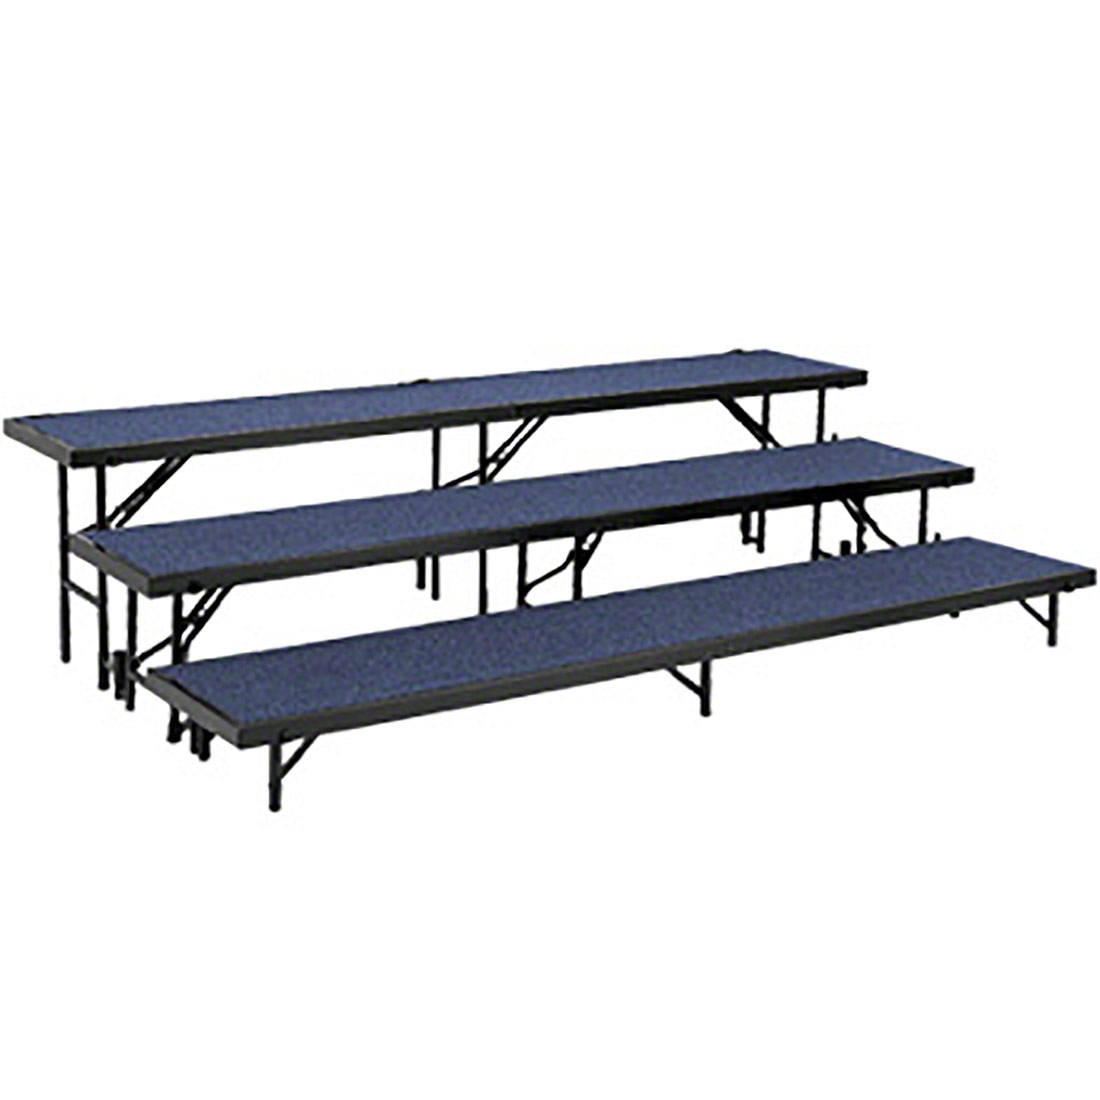 Rt3lc-04 3 Level Tapered Standing Choral Riser, Blue Carpet - 18 X 96 In. Platform